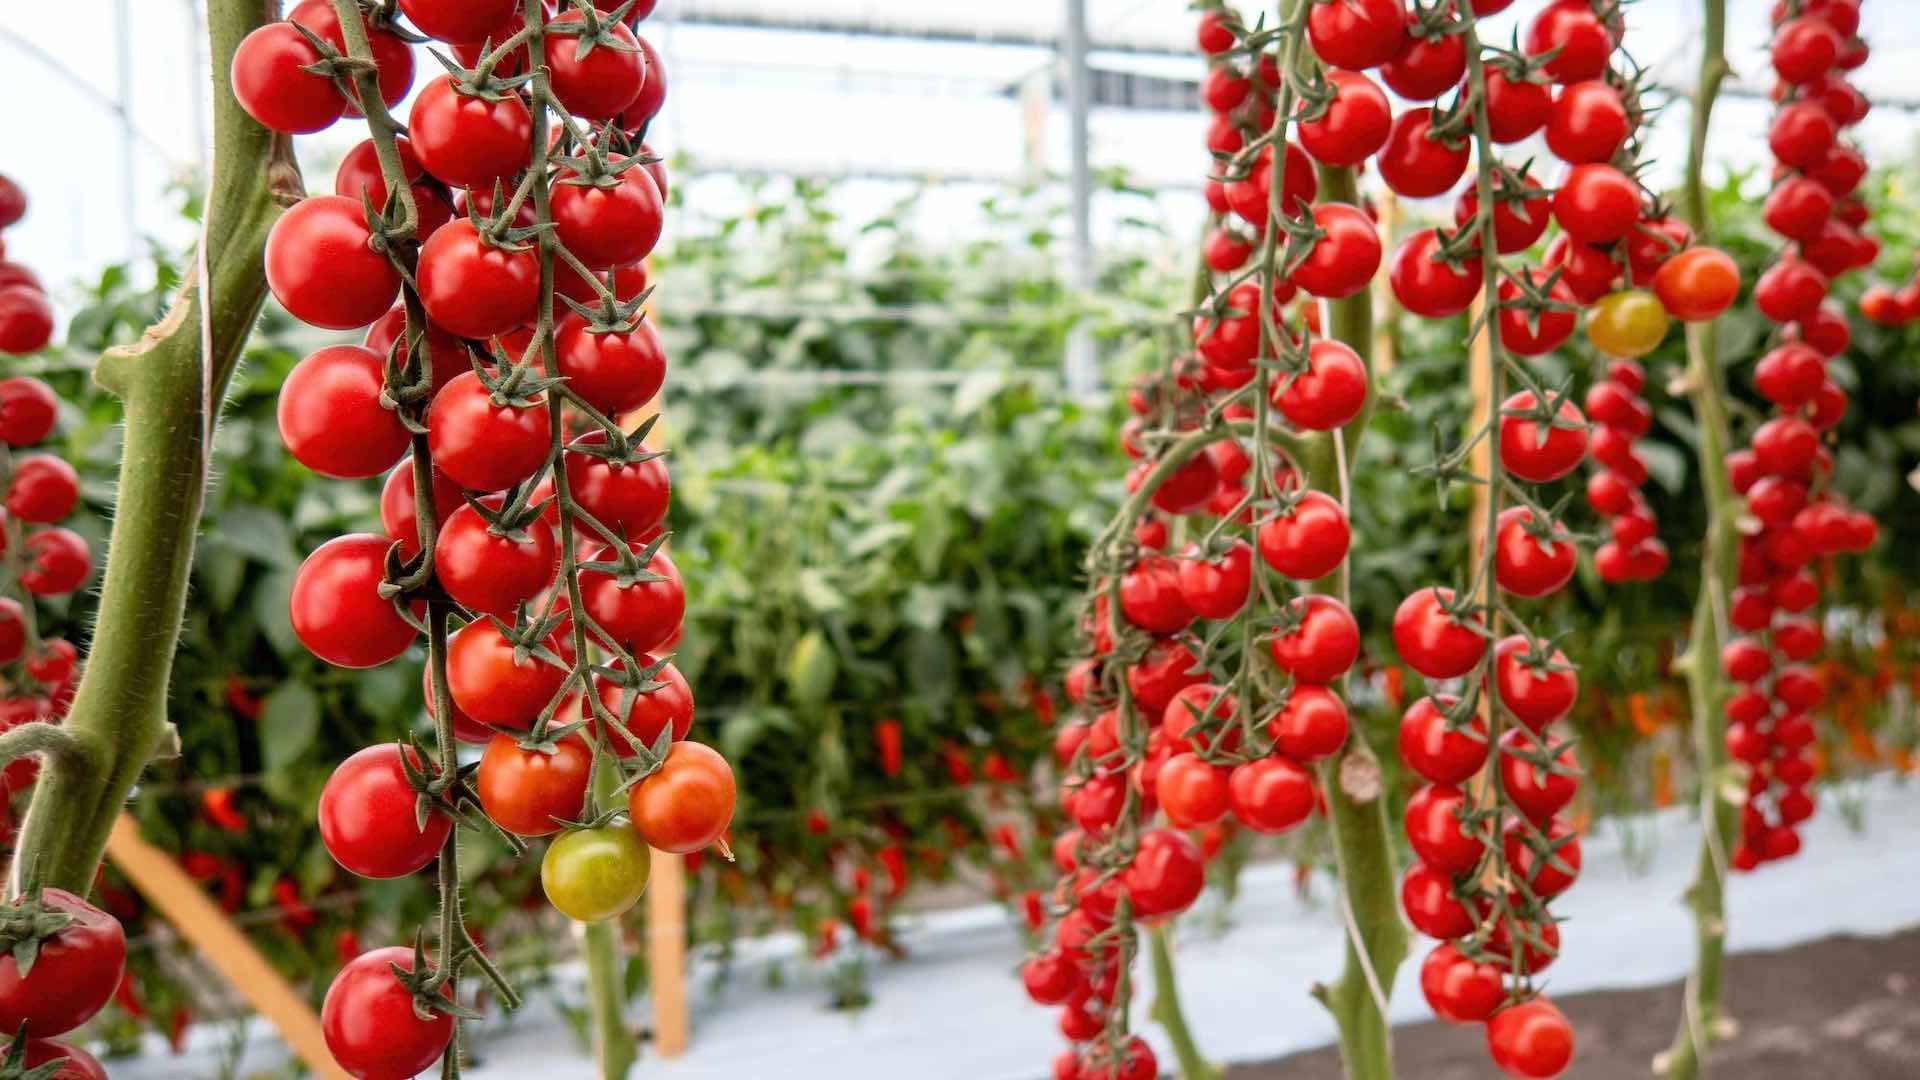 UAE’s bold move into sustainable agriculture with advanced greenhouse